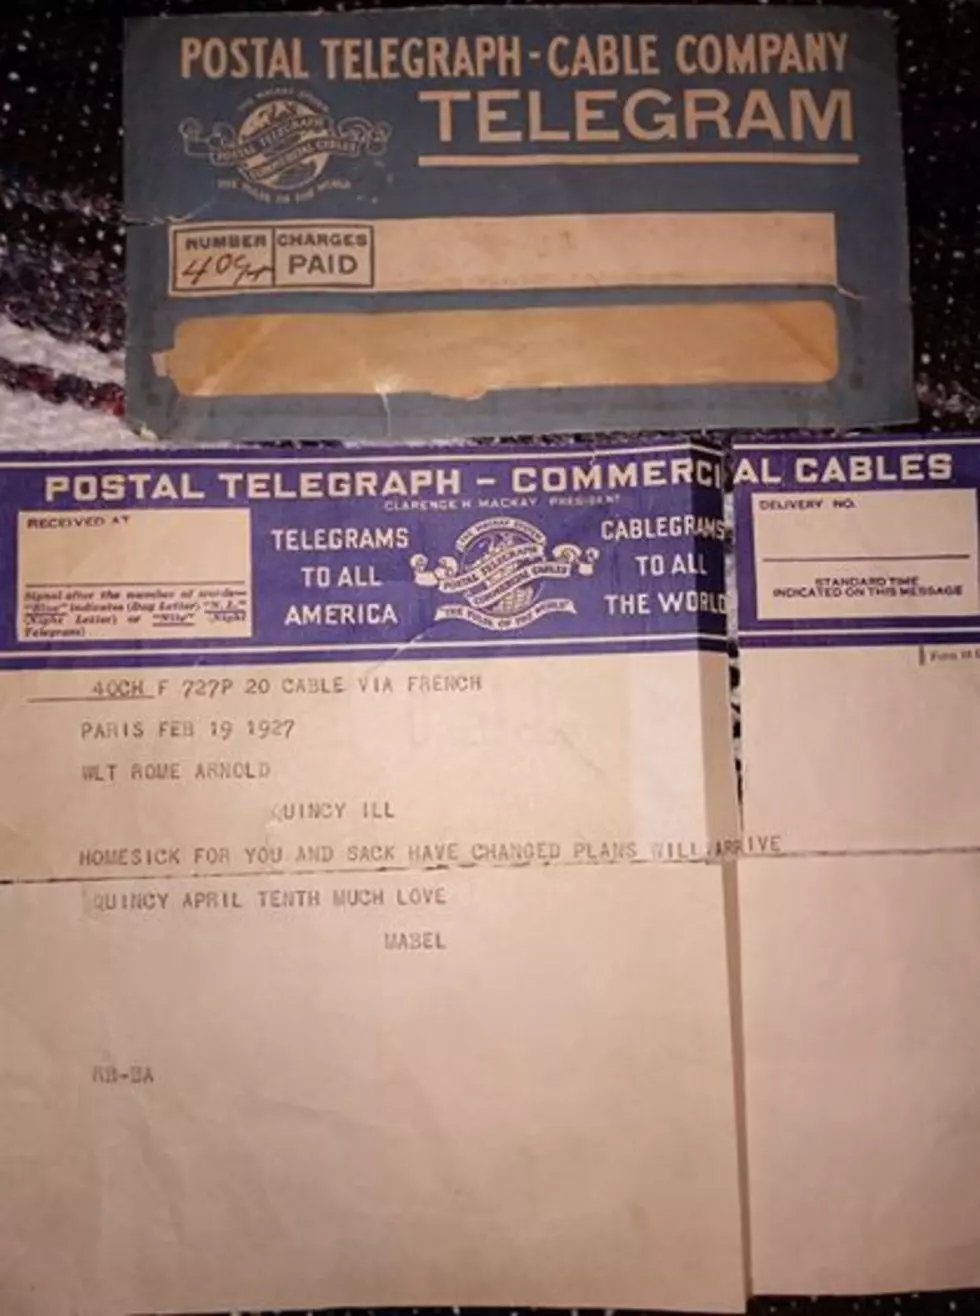 Do You Know The Quincy Family On This 90-Year-Old Telegram?